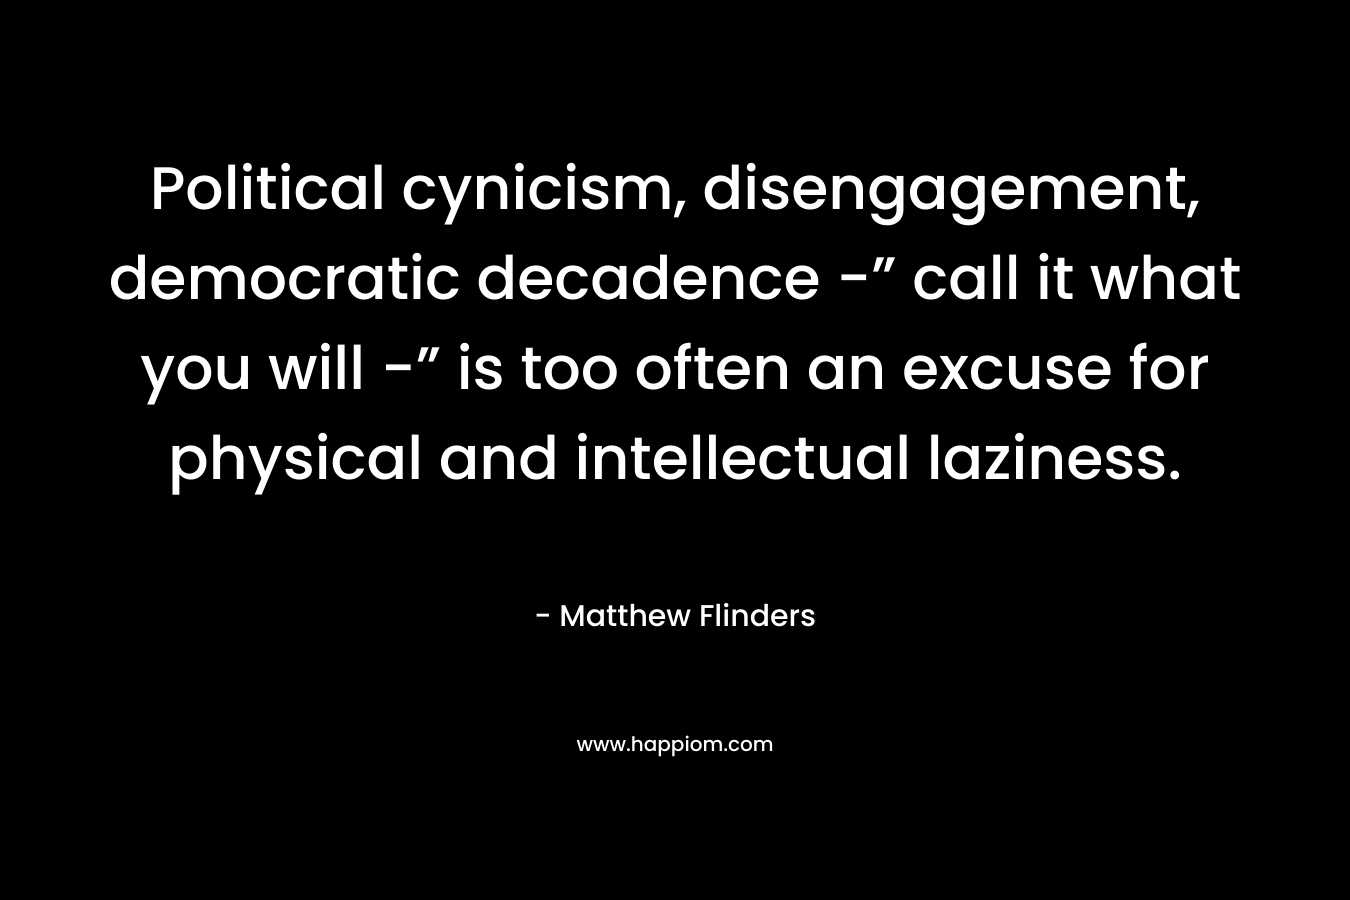 Political cynicism, disengagement, democratic decadence -” call it what you will -” is too often an excuse for physical and intellectual laziness.